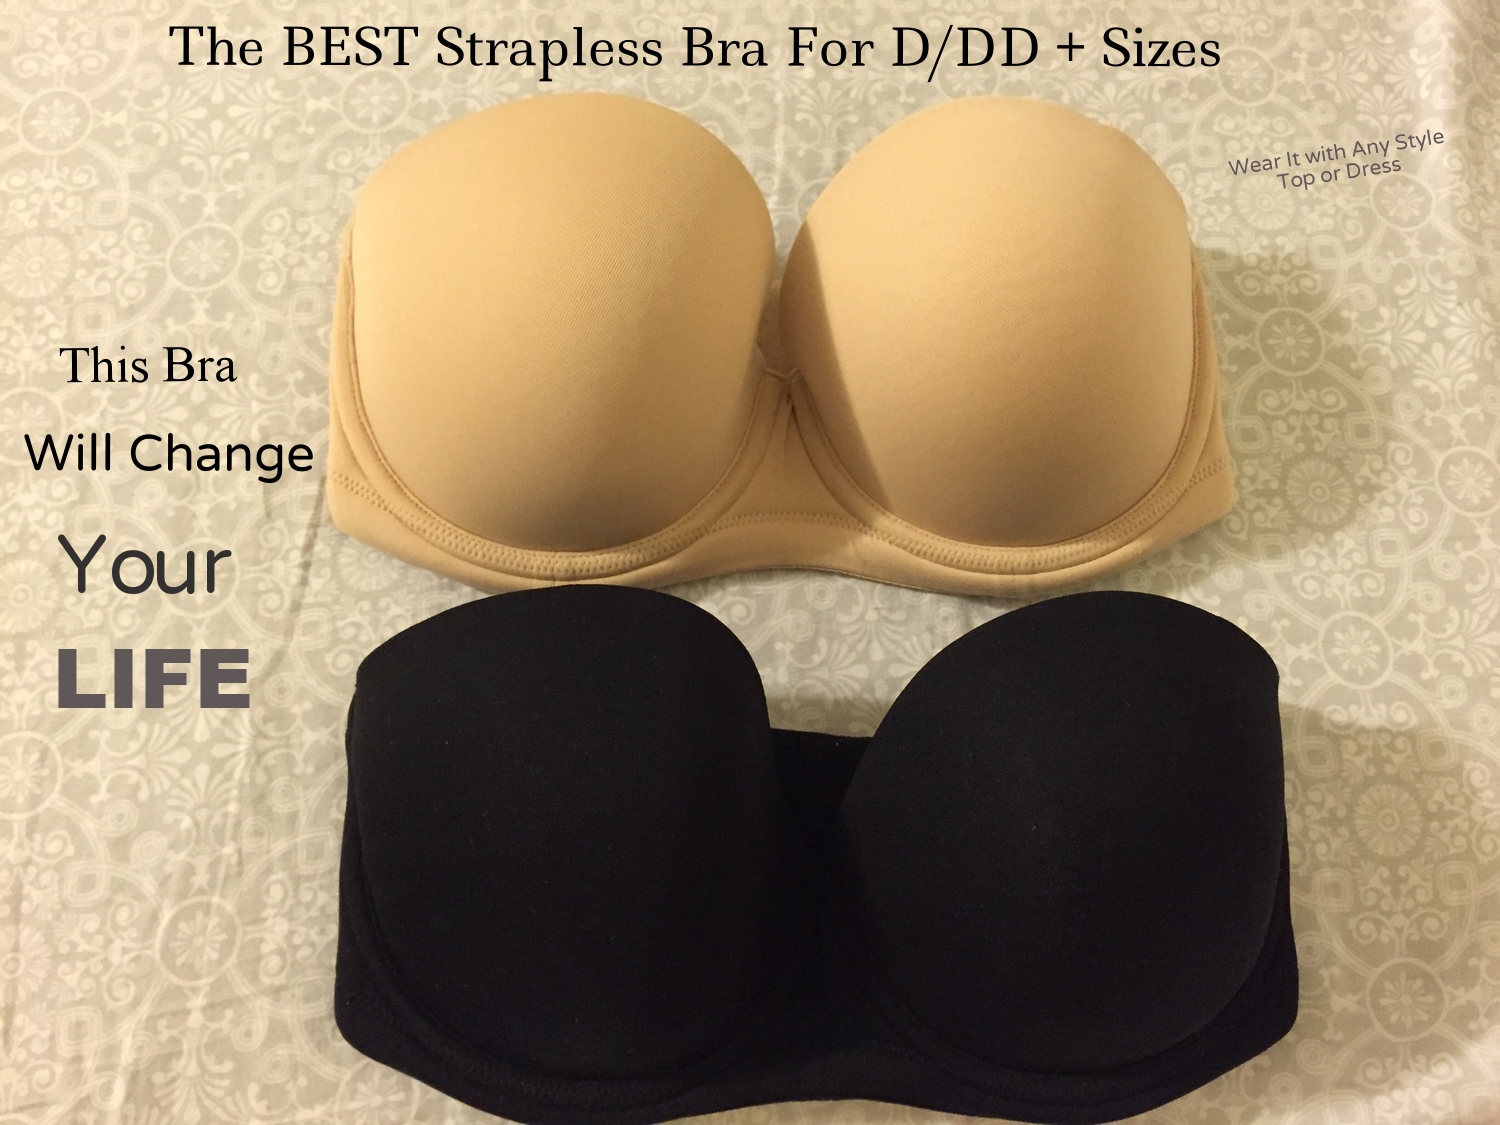 The Best Strapless Bras for C, D, or DD Cup Large Breasts